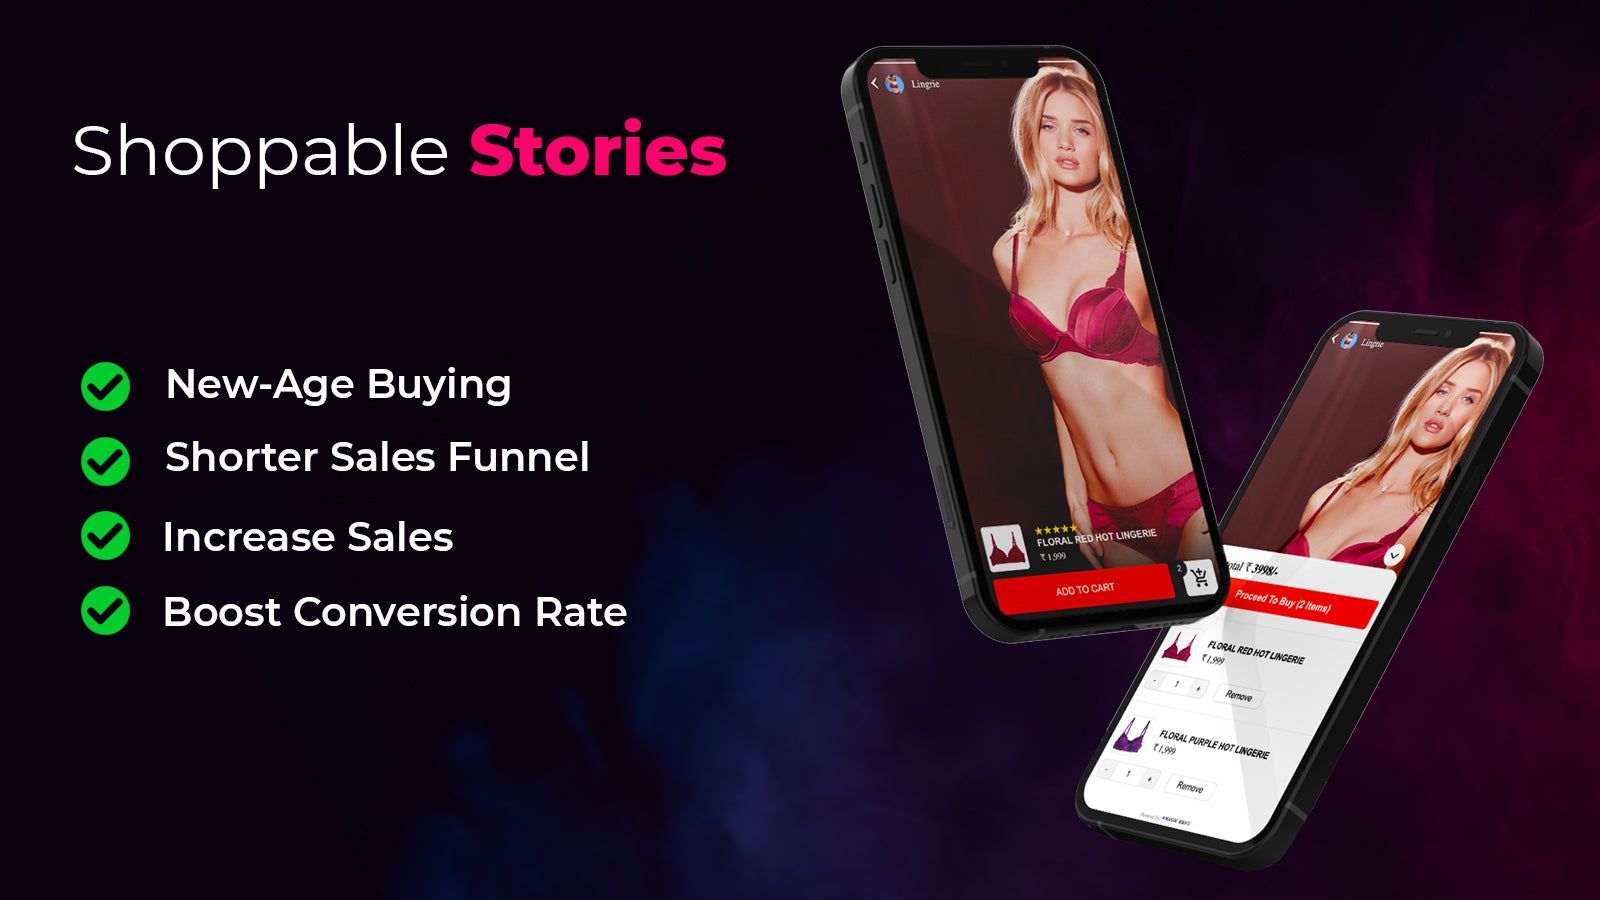 Shoppable Stories